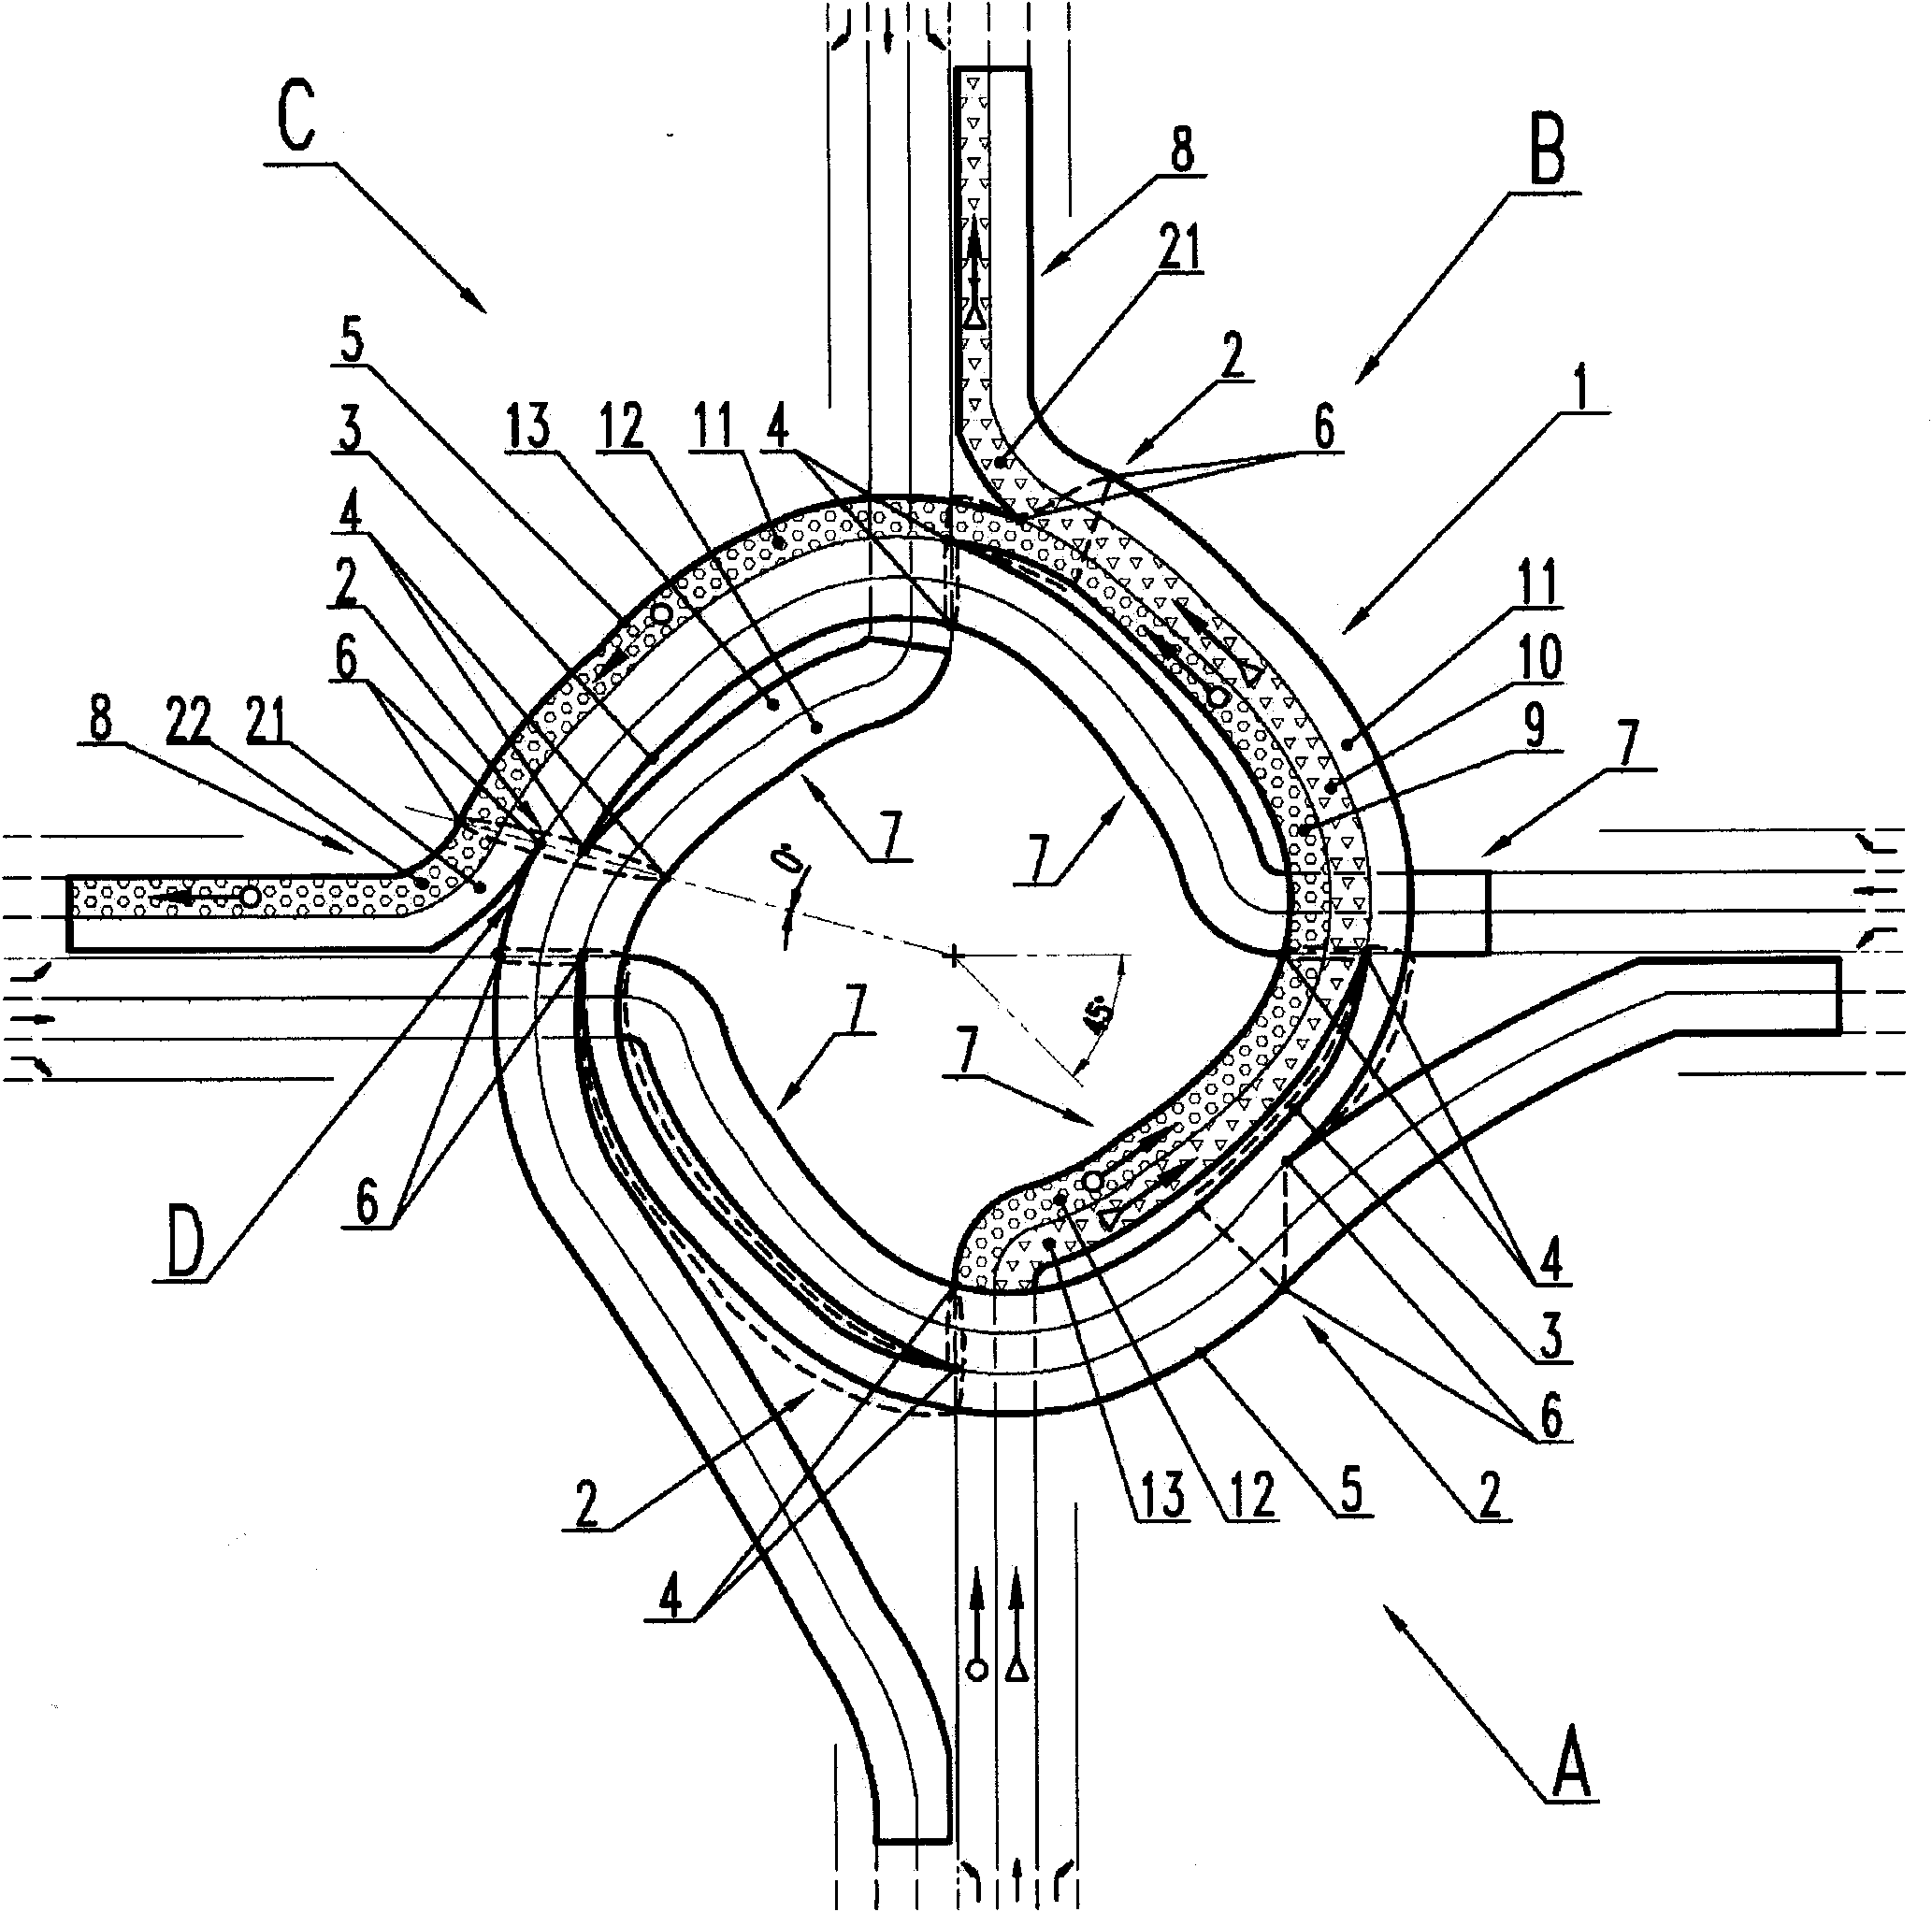 Annular flyover for straight movement and large-radius turning at crossroad